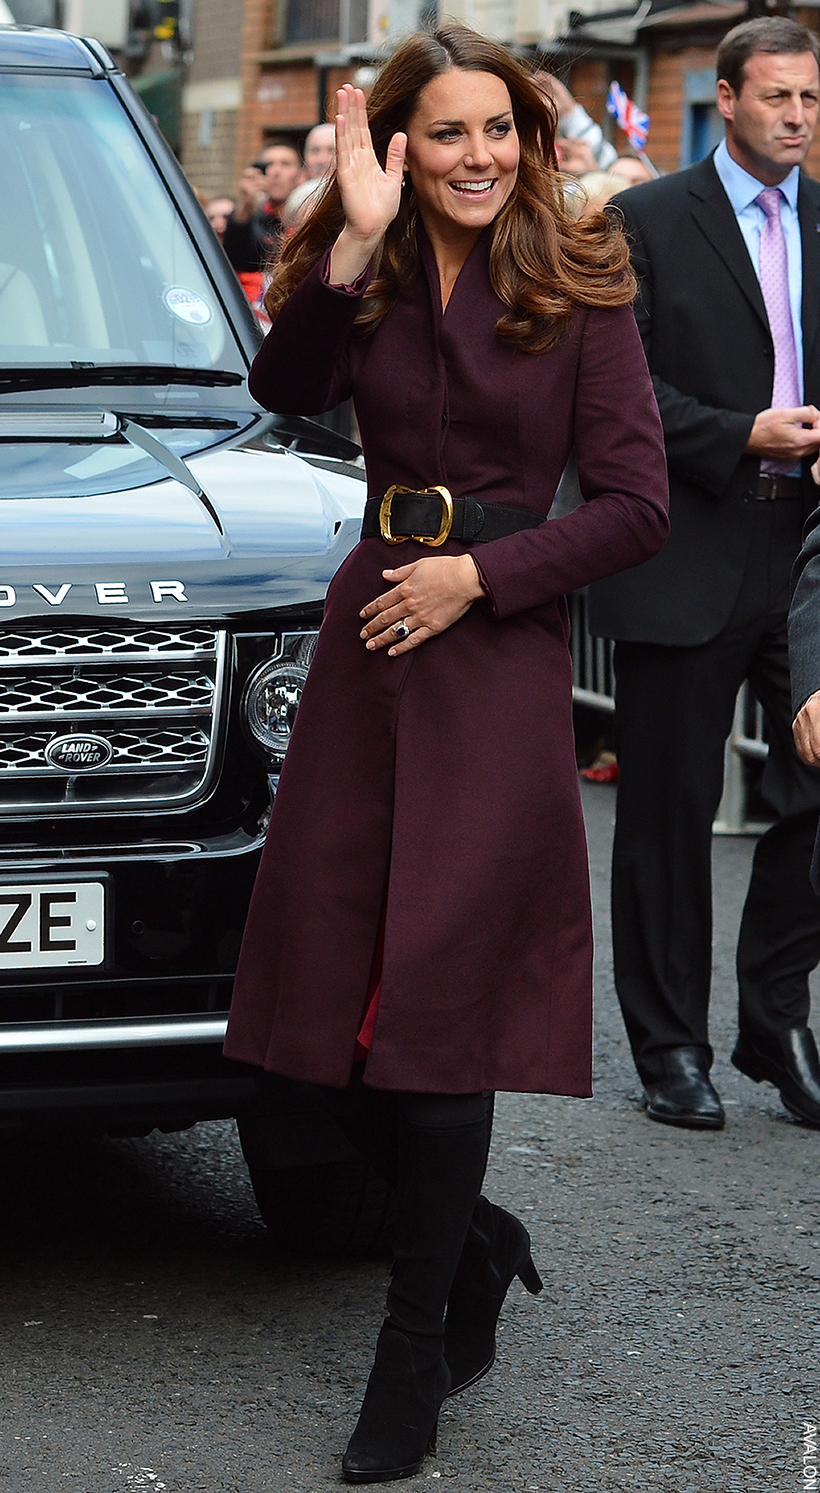 The Princess of Wales wearing a dark aubergine coloured coat, belted at the waist.   Her look is finished with a pair of dark black knee high boots.  She is waving to the public.